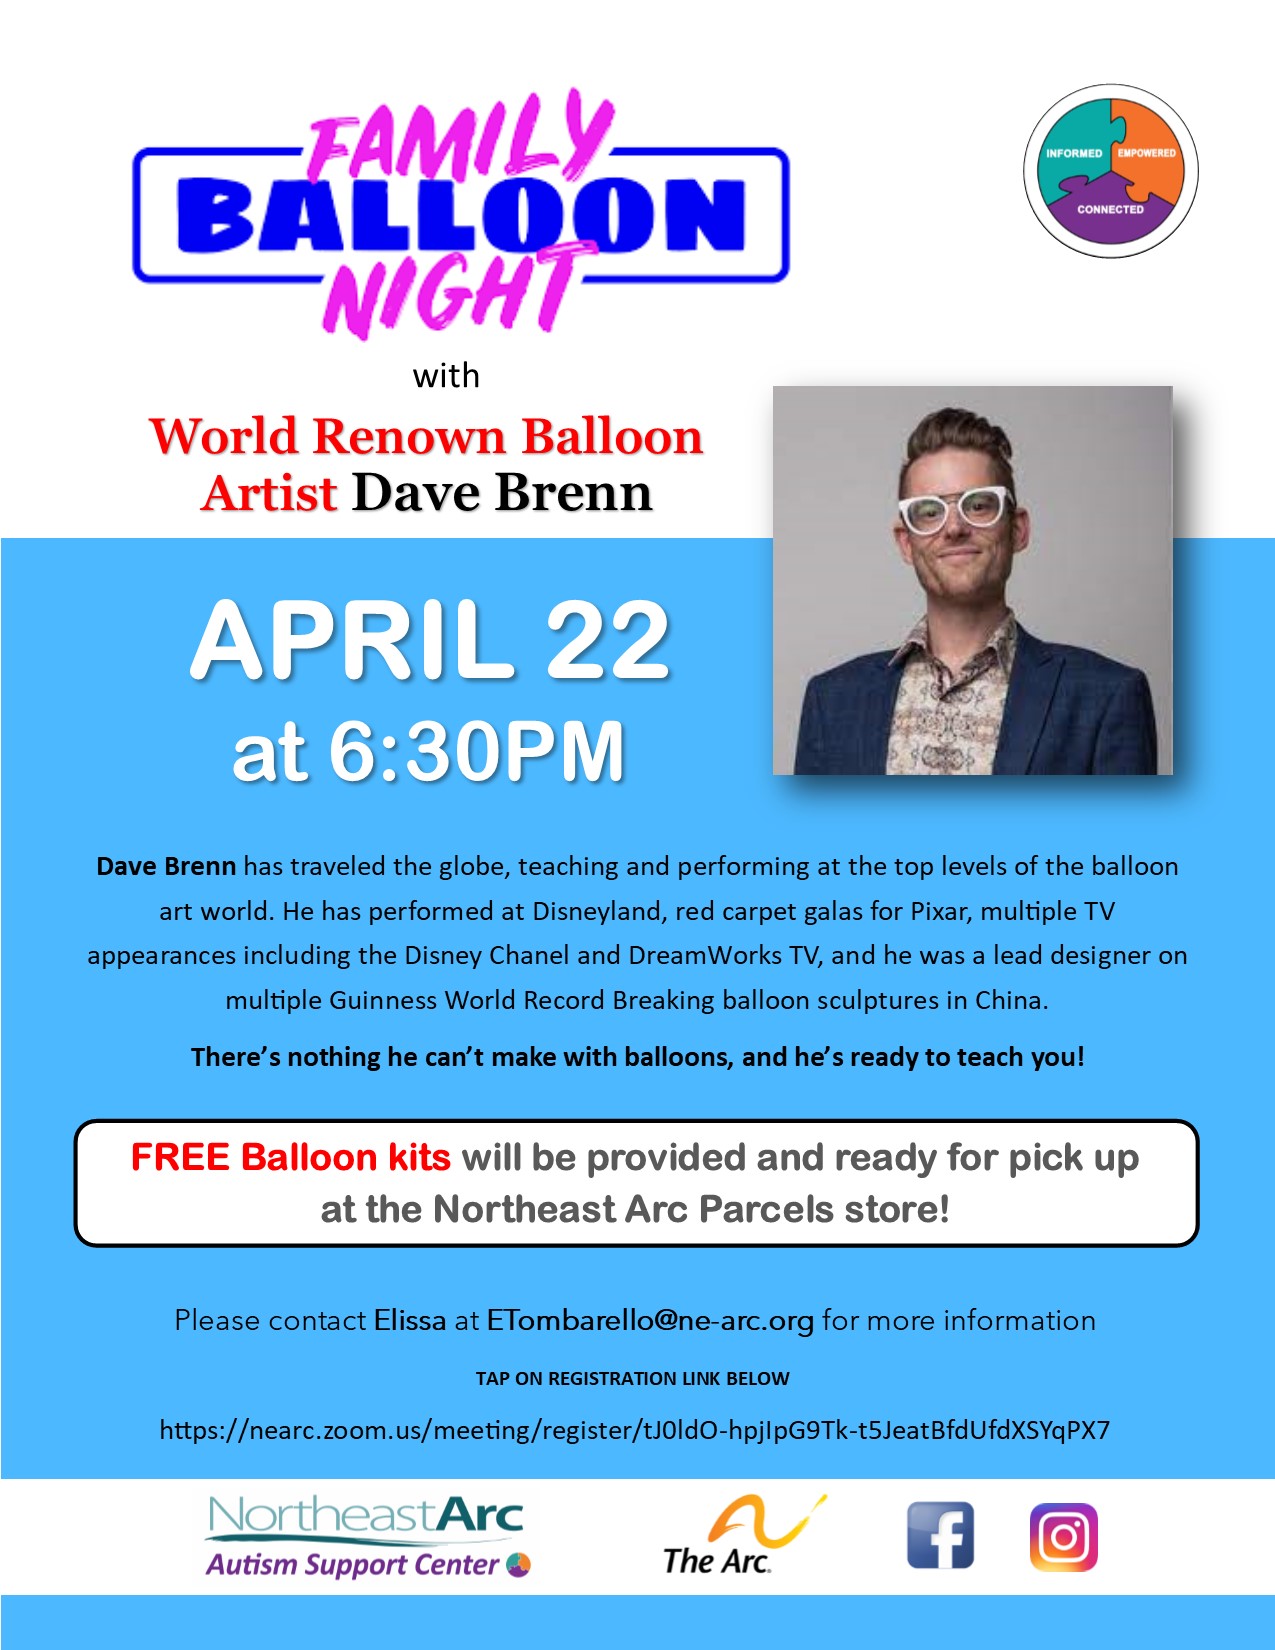 Flyer for a Free Virtual Event with World Renown Balloon Artist Dave Brenn on April 22 at 6:30PM. Please rsvp Elissa at ETombarello@ne-arc.org for more information. Free Balloon Kits will be available for pick up prior to the event.